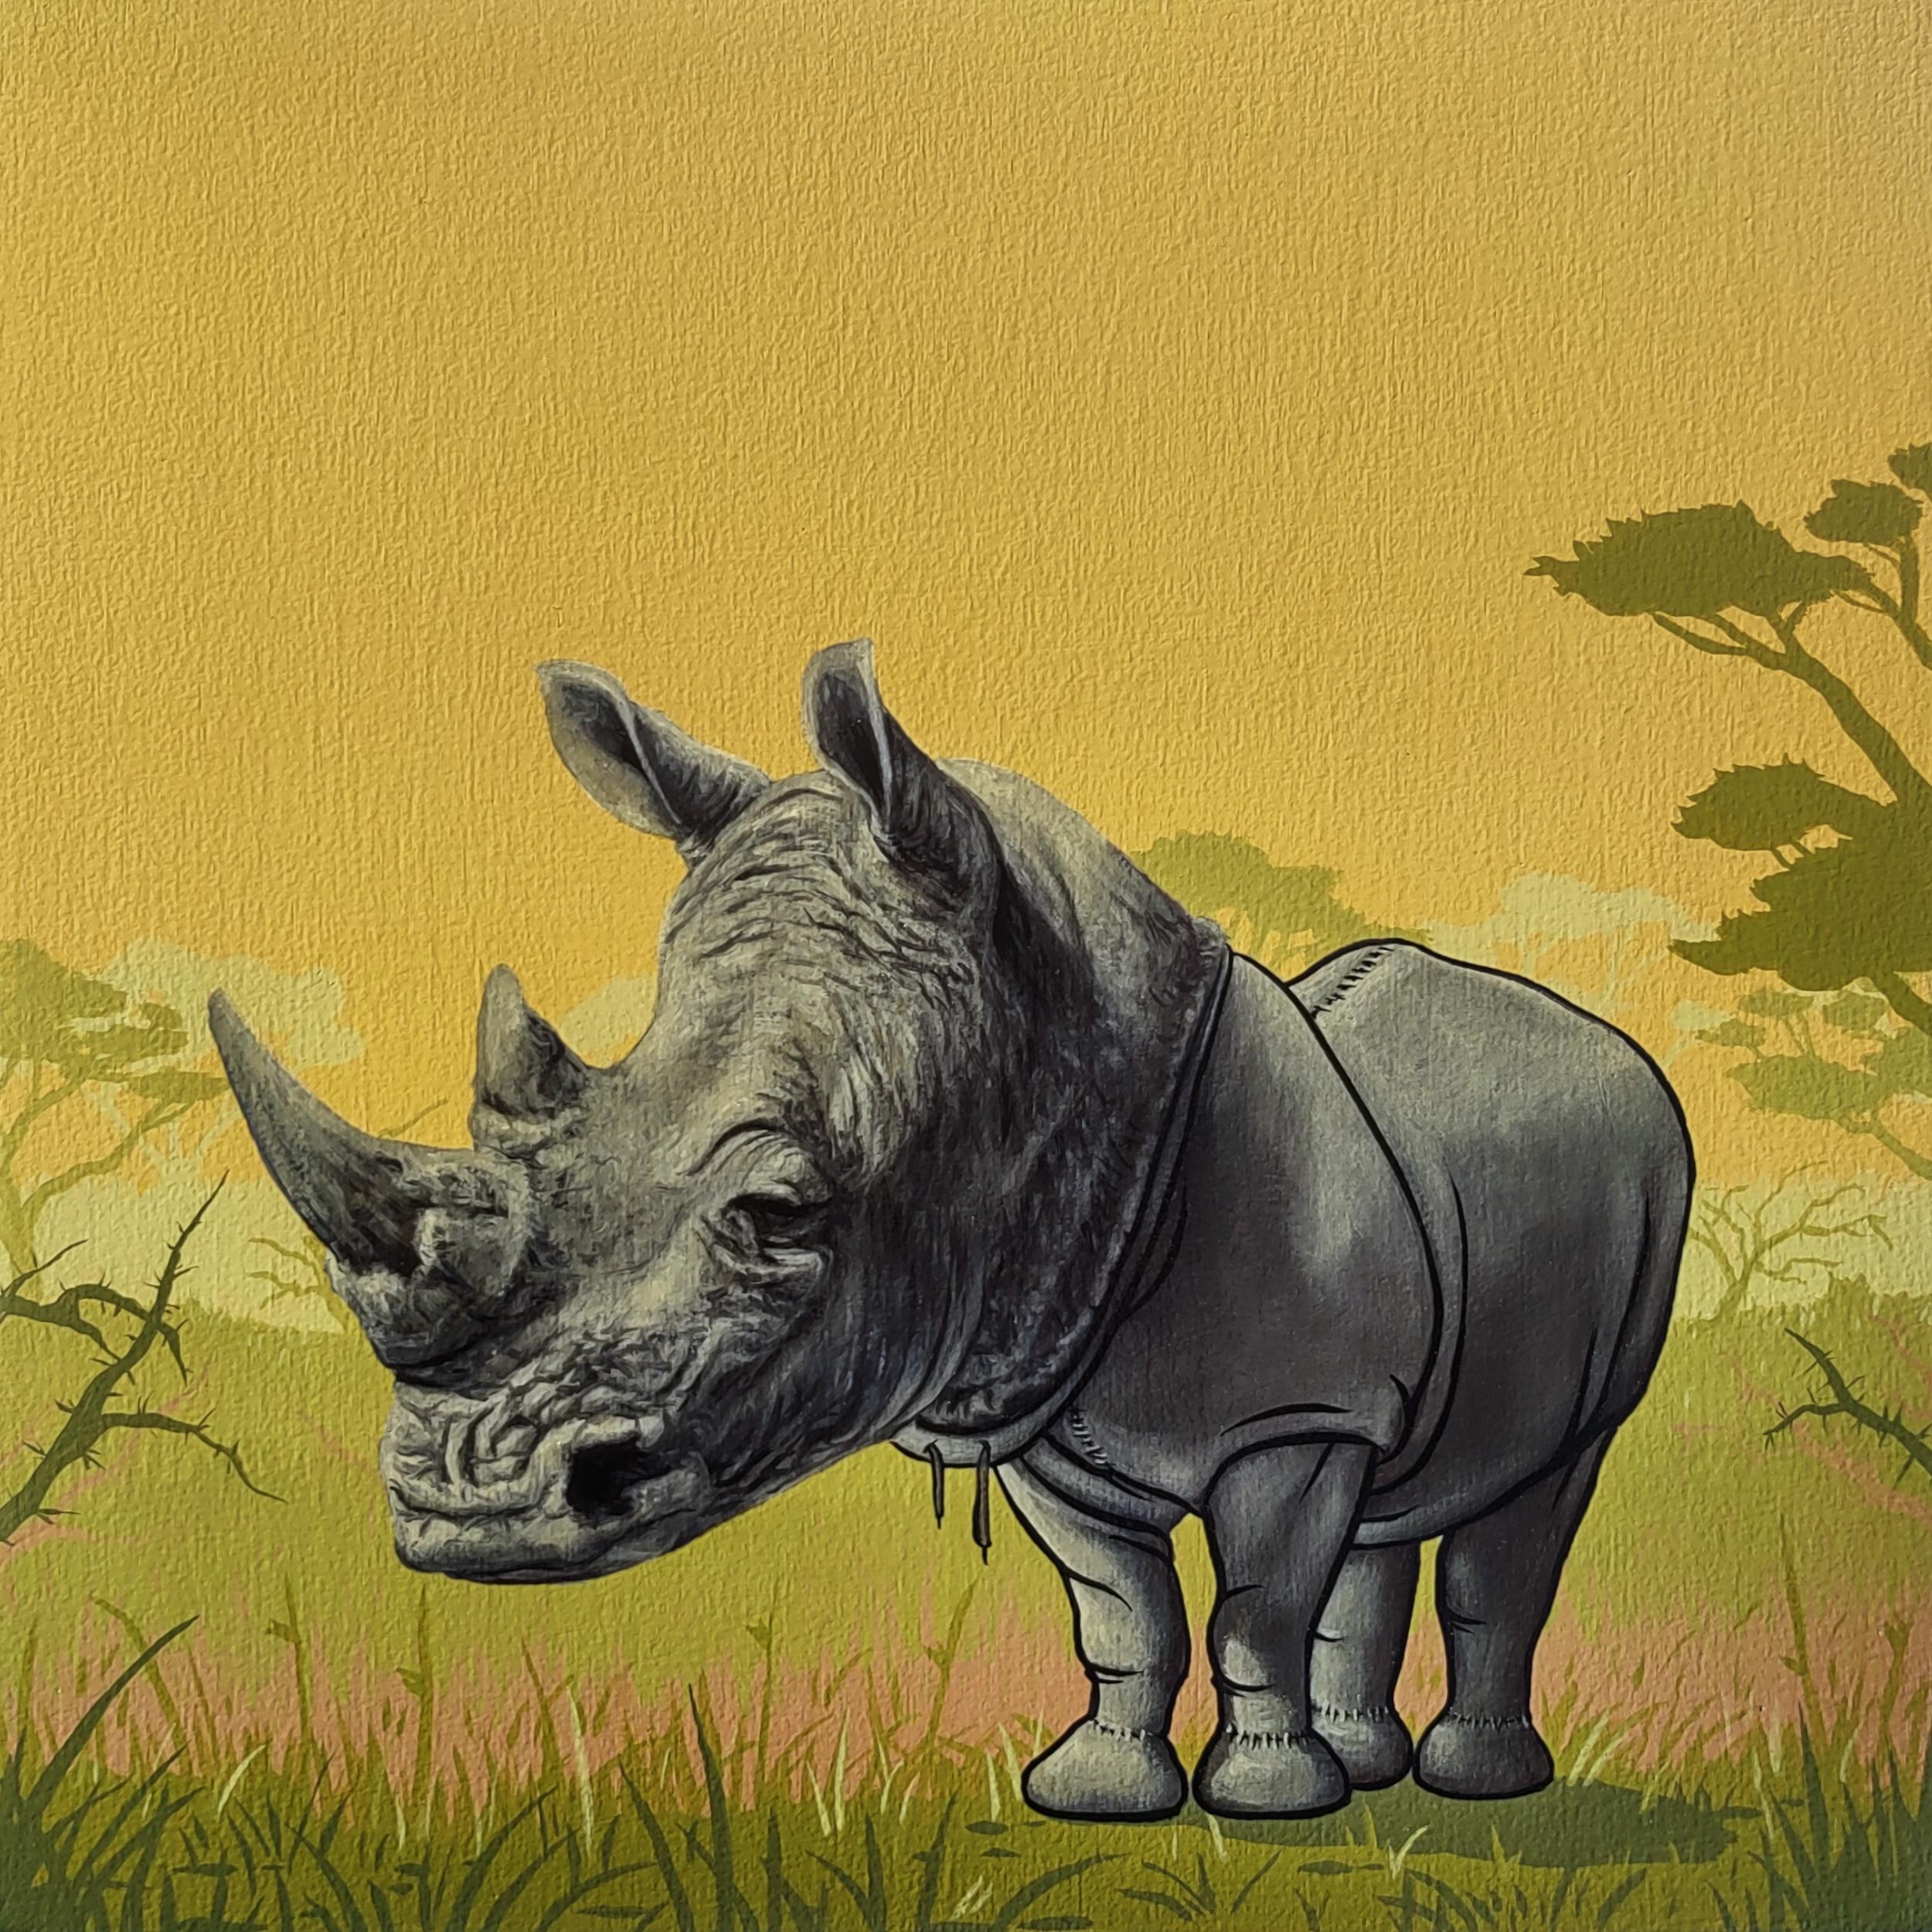 3rd Version (Ben Patterson) Animal Painting - "Masks We Wear, Wanting to Grow", Rhinoceros with a  Mask Oil Painting